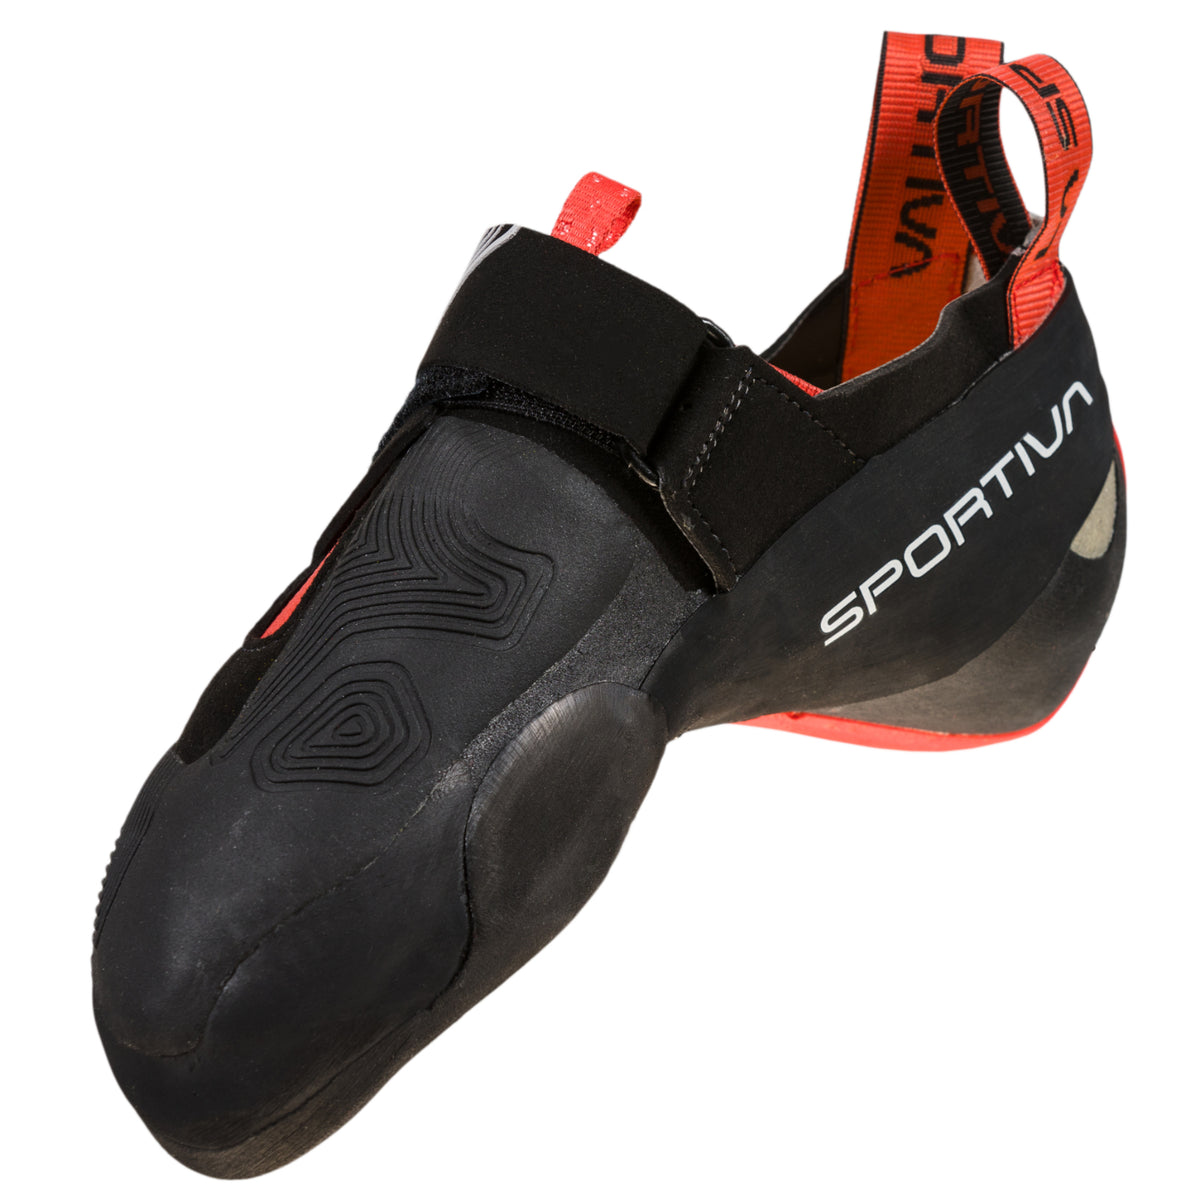 La Sportiva Theory Womens in black and red showing inside profile